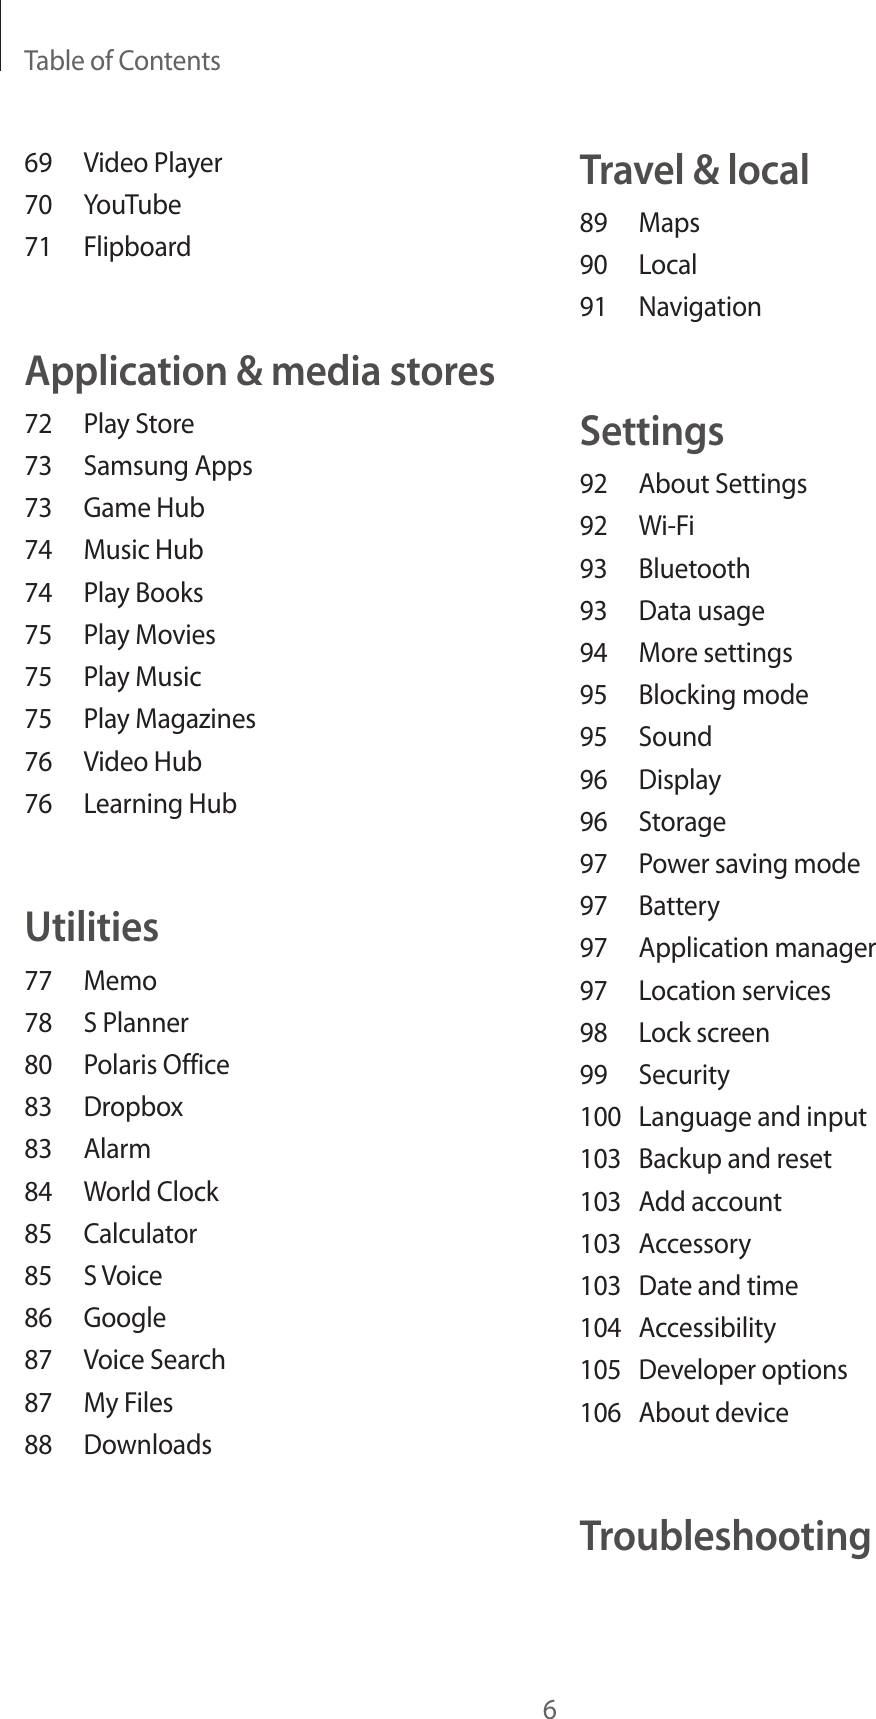 Table of Contents6Travel &amp; local89 Maps90 Local91 NavigationSettings92  About Settings92 Wi-Fi93 Bluetooth93  Data usage94  More settings95  Blocking mode95 Sound96 Display96 Storage97  Power saving mode97 Battery97  Application manager97  Location services98  Lock screen99 Security100  Language and input103  Backup and reset103  Add account103 Accessory103  Date and time104 Accessibility105  Developer options106  About deviceTroubleshooting69  Video Player70 YouTube71 FlipboardApplication &amp; media stores72  Play Store73  Samsung Apps73  Game Hub74  Music Hub74  Play Books75  Play Movies75  Play Music75  Play Magazines76  Video Hub76  Learning HubUtilities77 Memo78  S Planner80  Polaris Office83 Dropbox83 Alarm84  World Clock85 Calculator85  S Voice86 Google87  Voice Search87  My Files88 Downloads